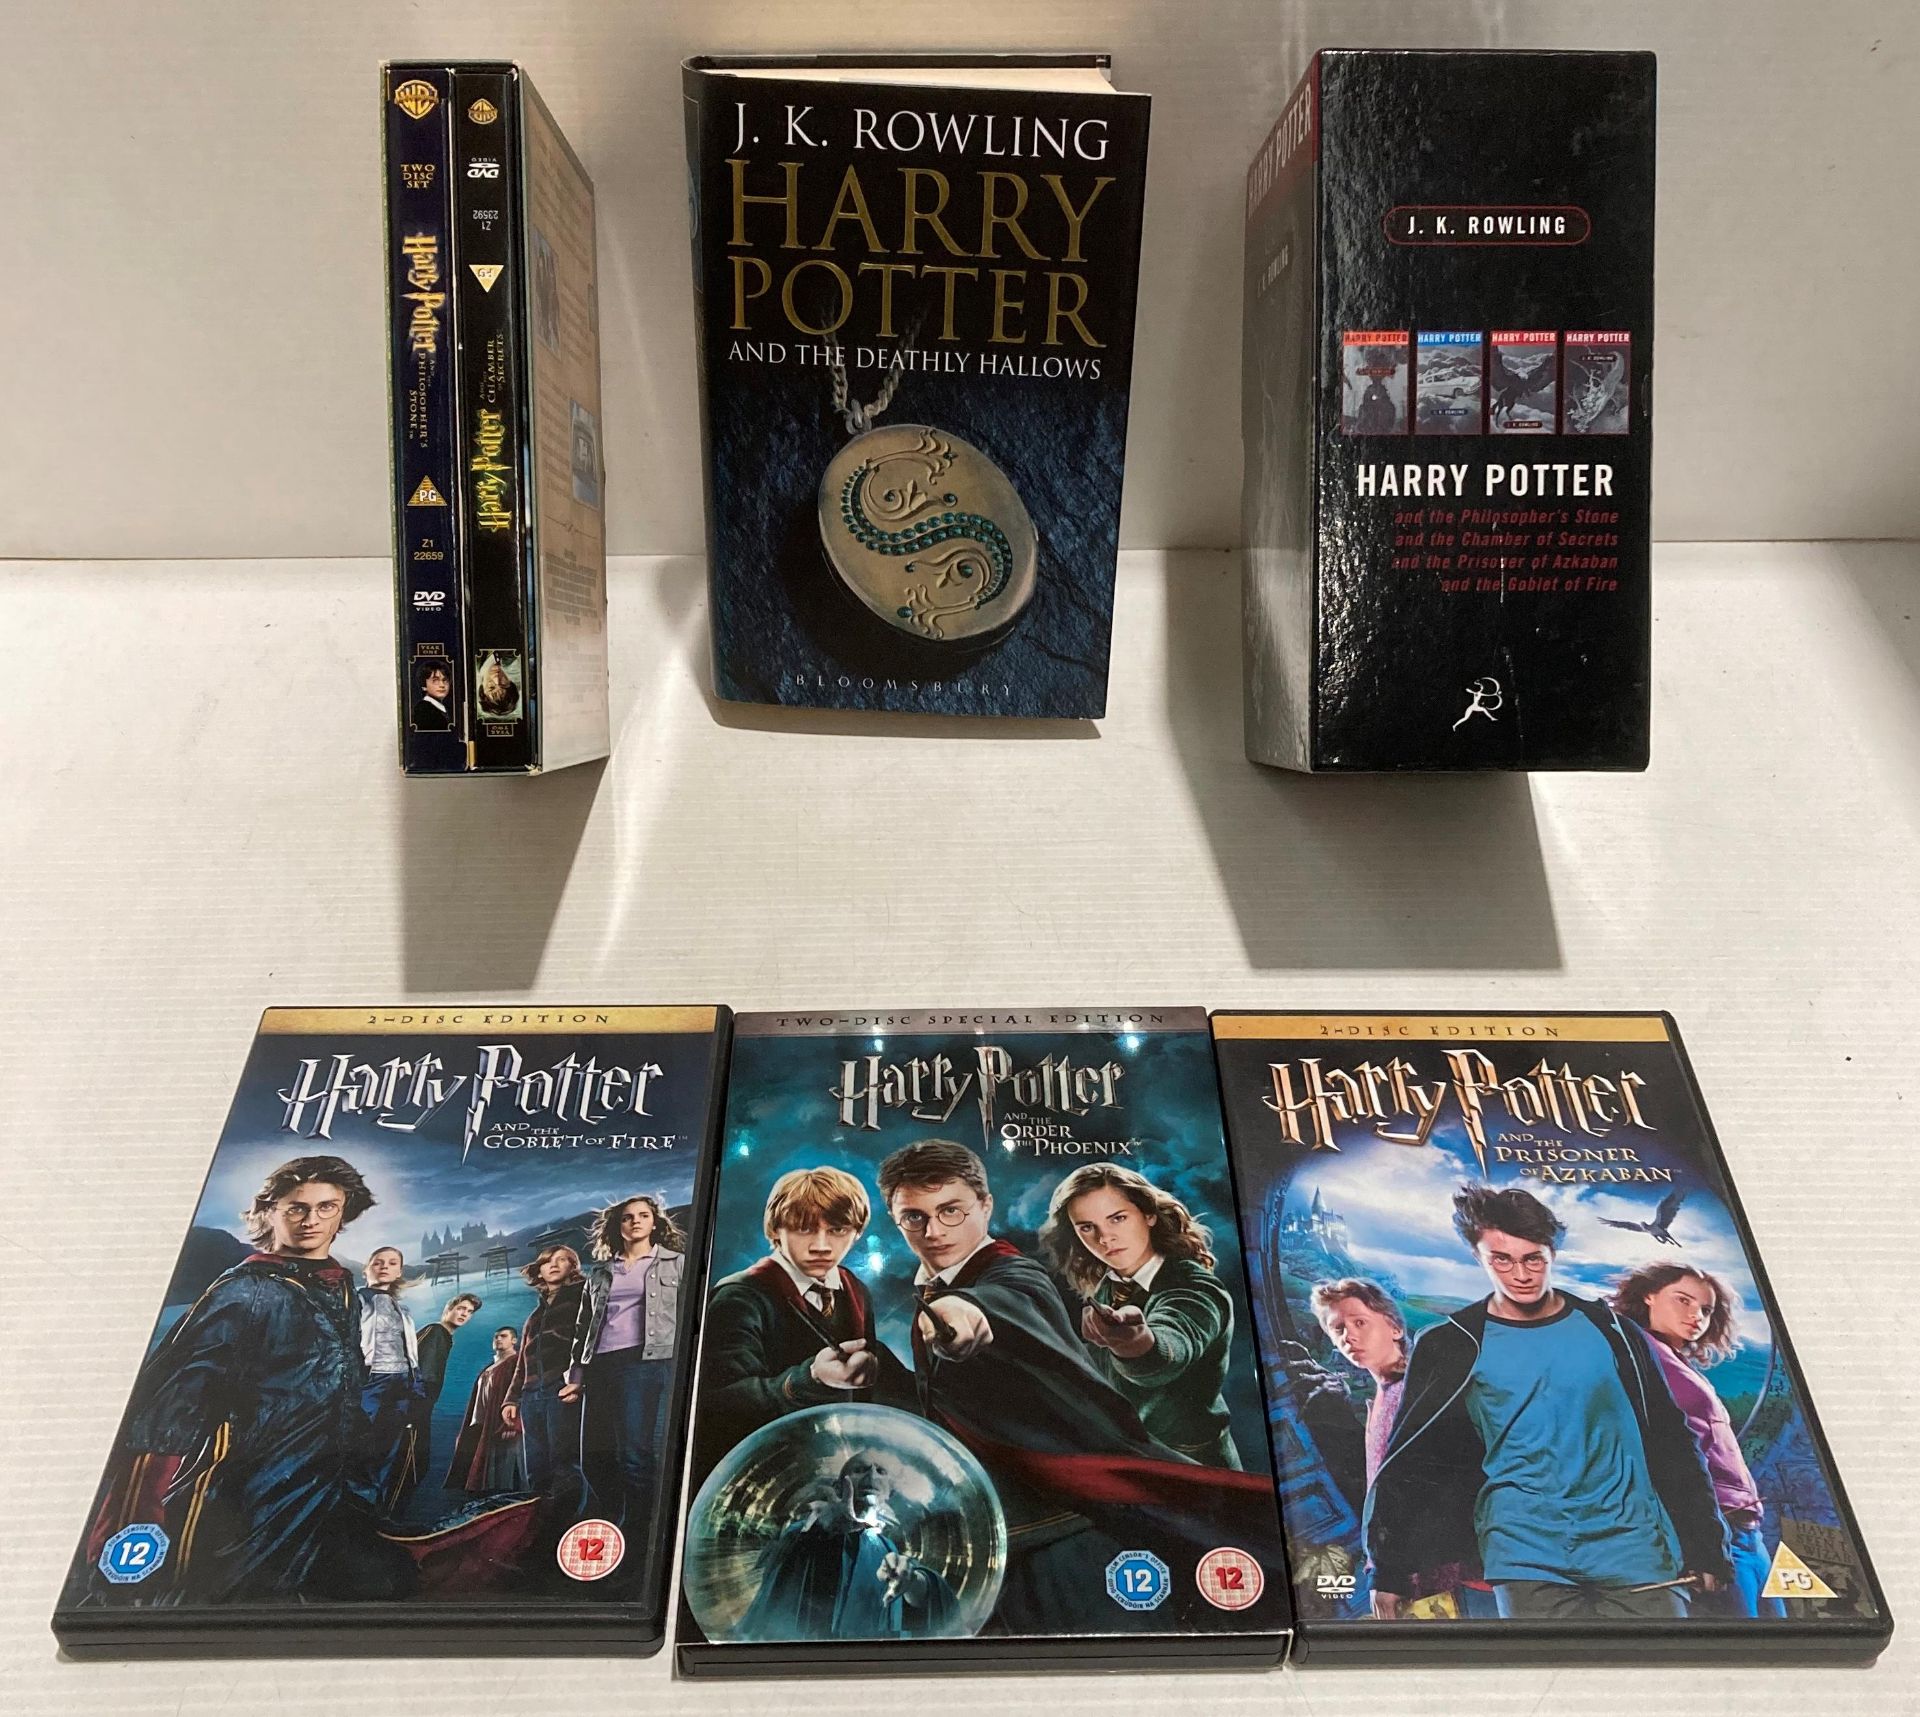 J K Rowling 'Harry Potter and the Deathly Hallows', first edition, published by Bloomsbury 2007,